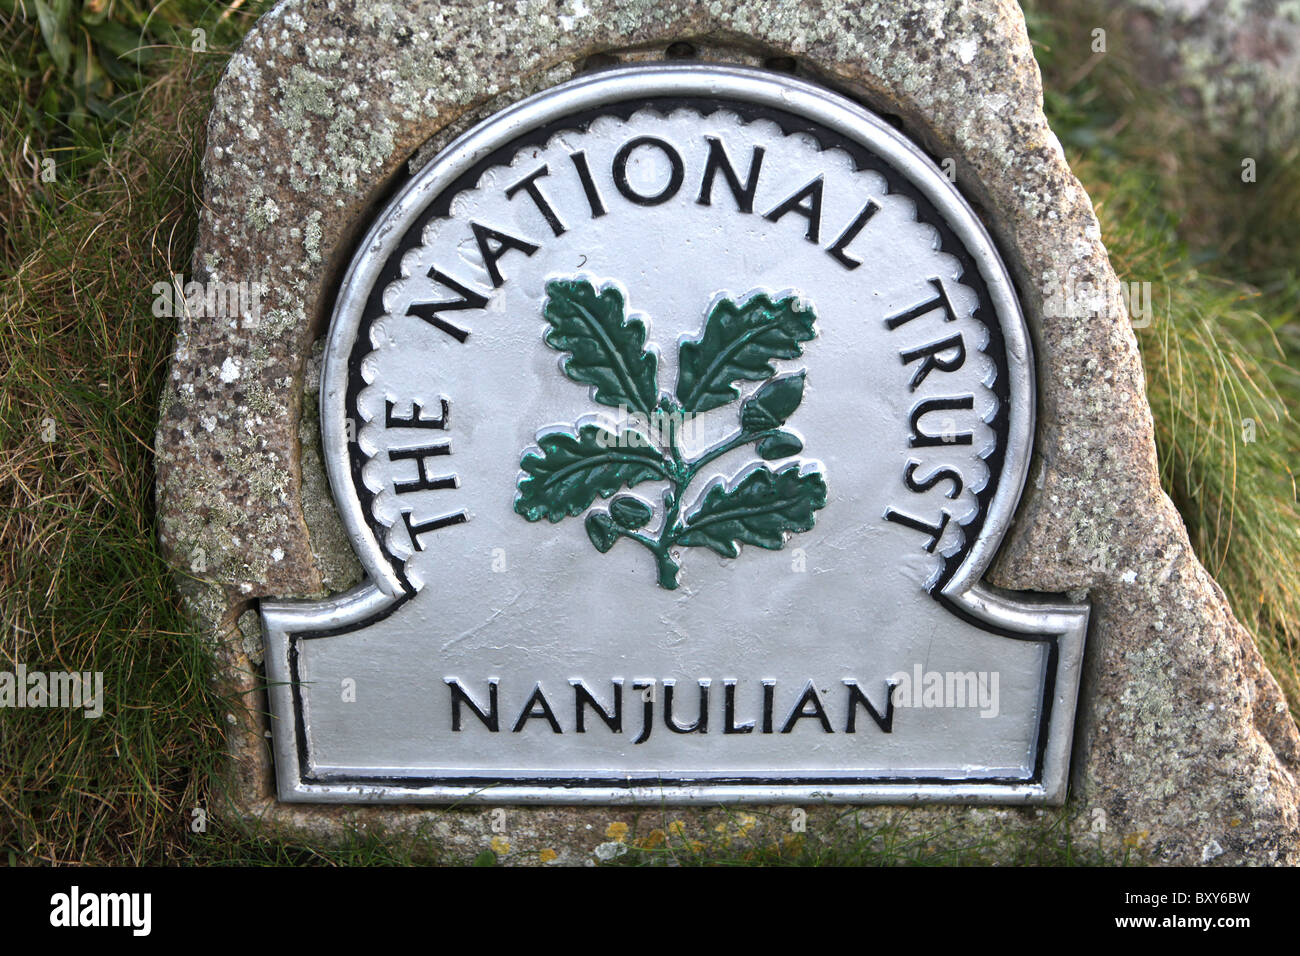 A National Trust sign for the area around Nanjulian in Penwith, Cornwall, England. Stock Photo